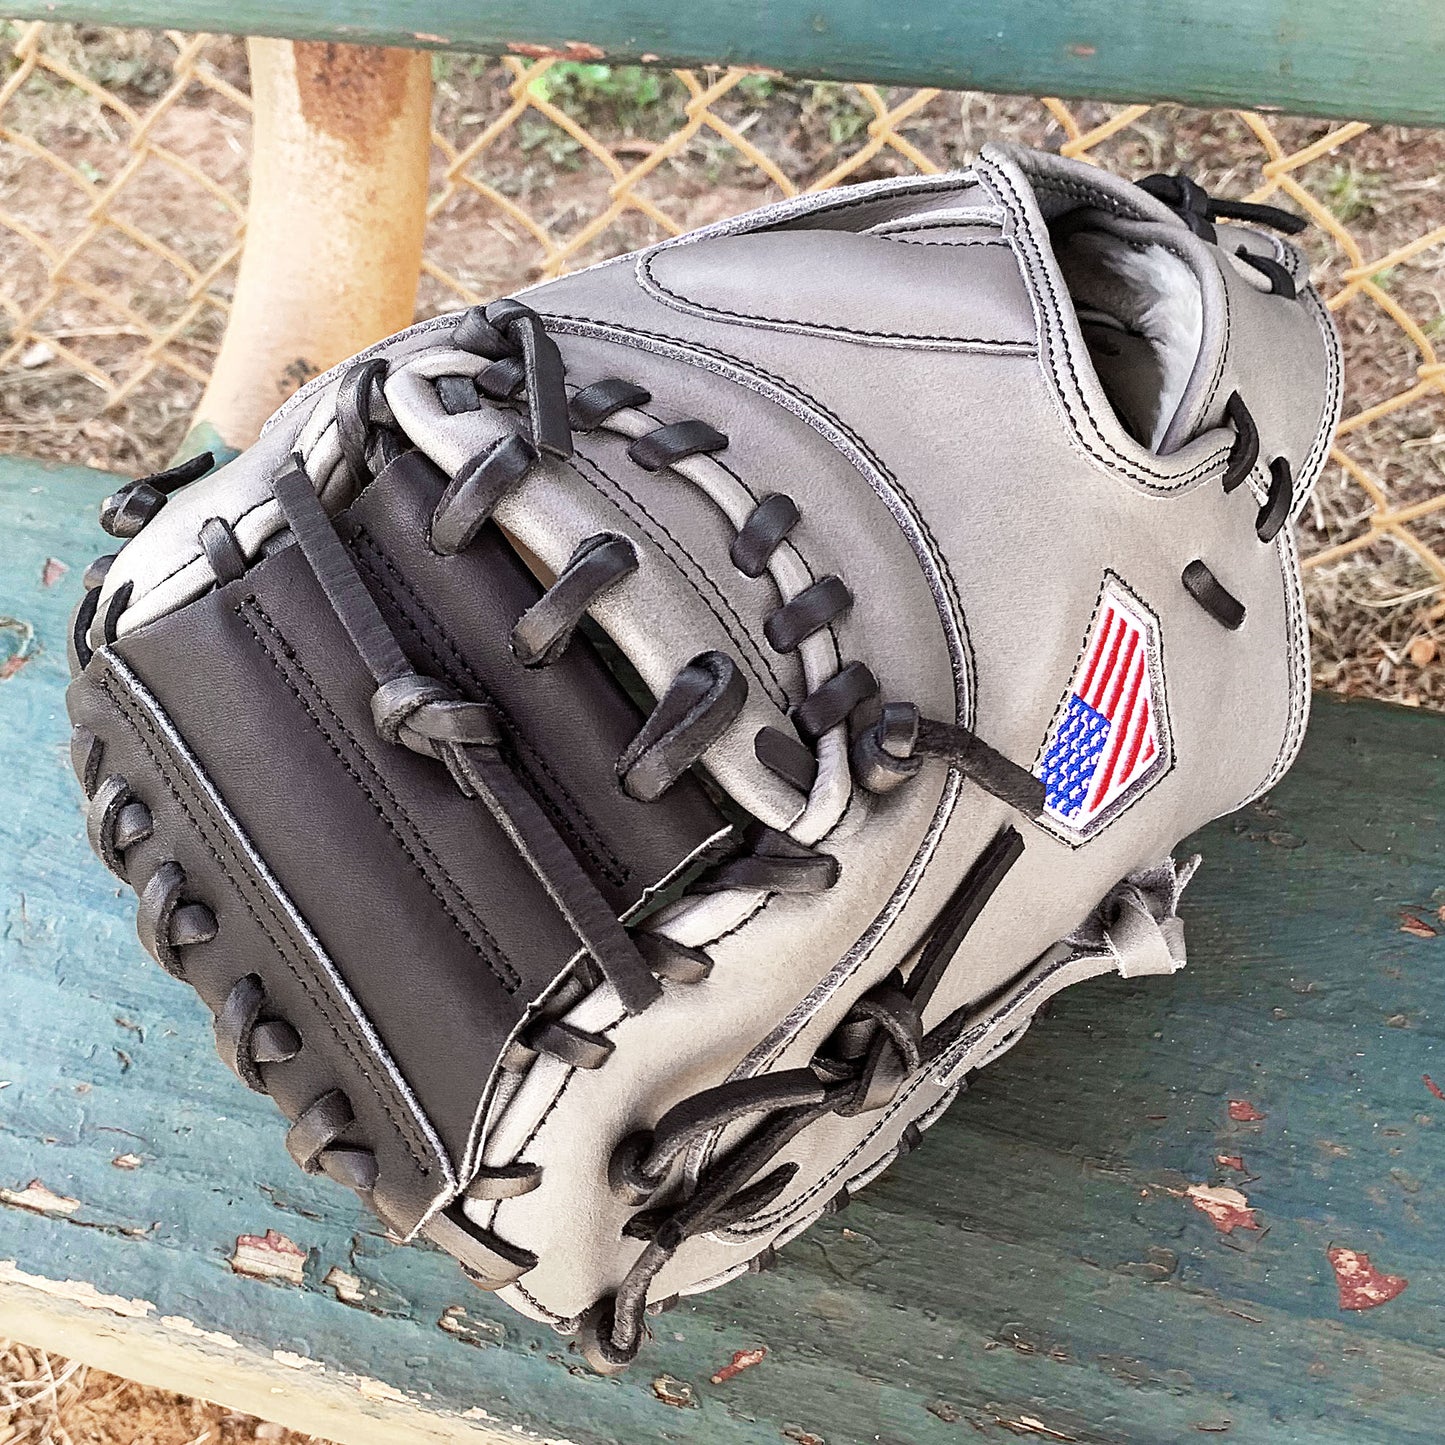 33.5" Baseball Catcher's Mitt - Gray with Black Web and Black Laces